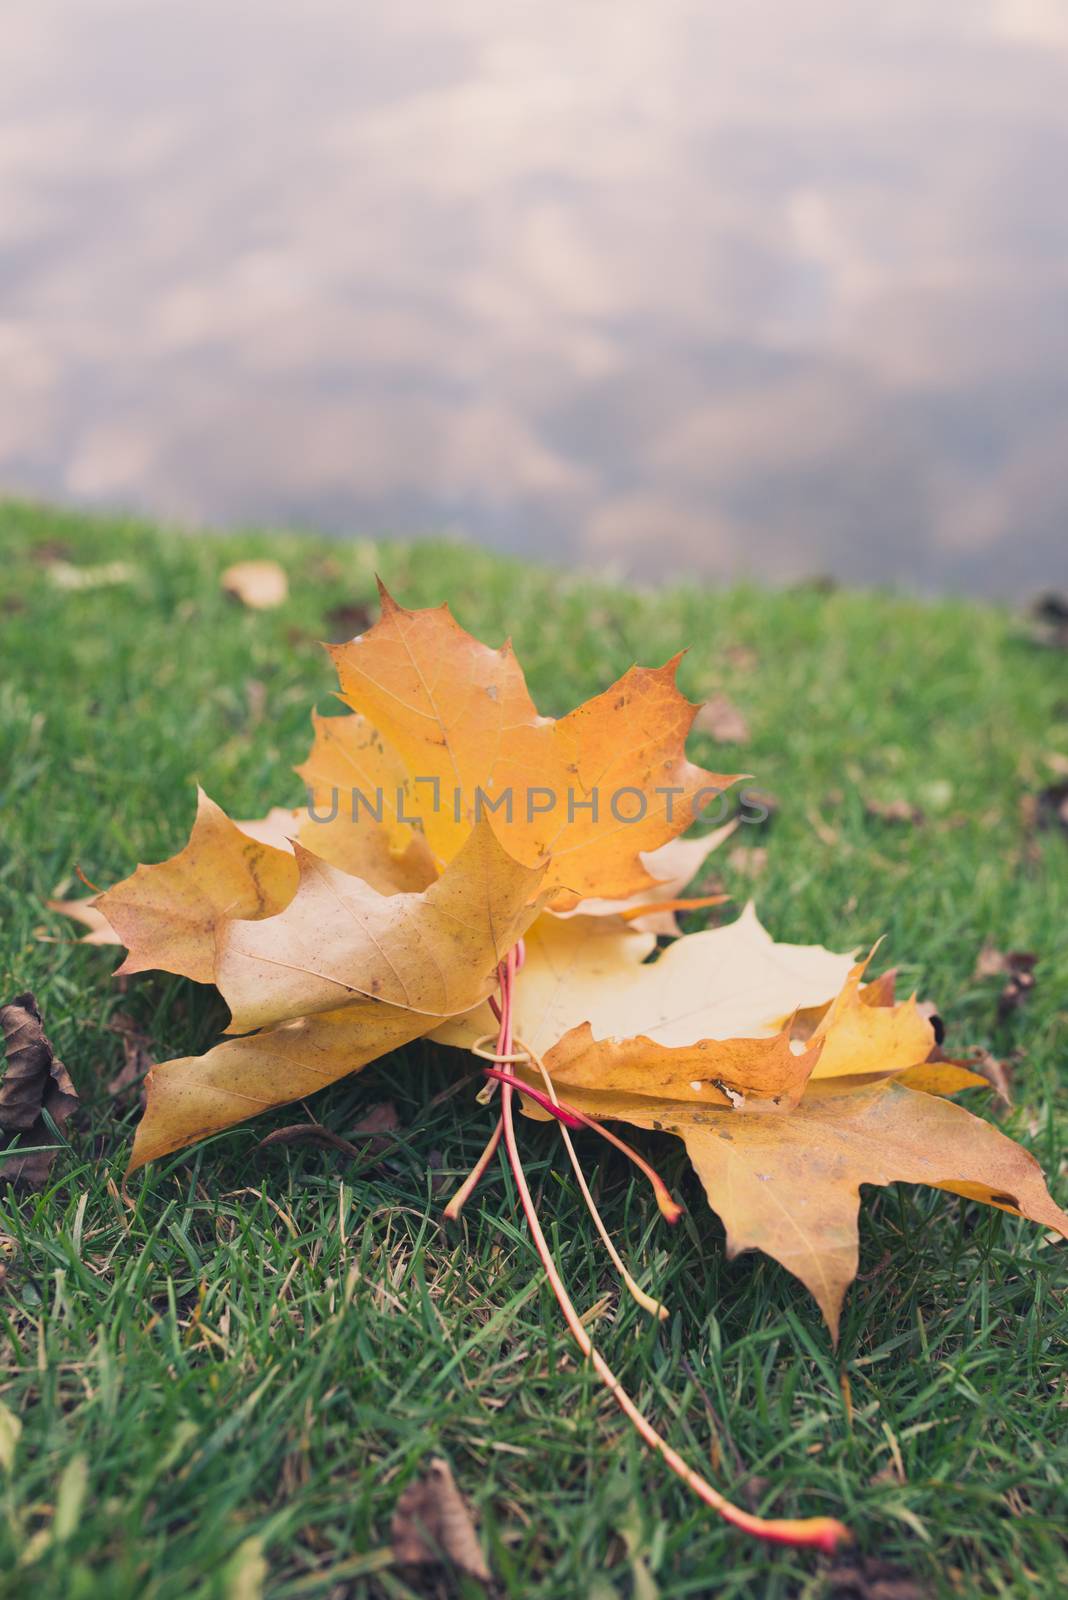 Group of Colorful autumn leaves laying on the grass via water background with copyspace for your text.